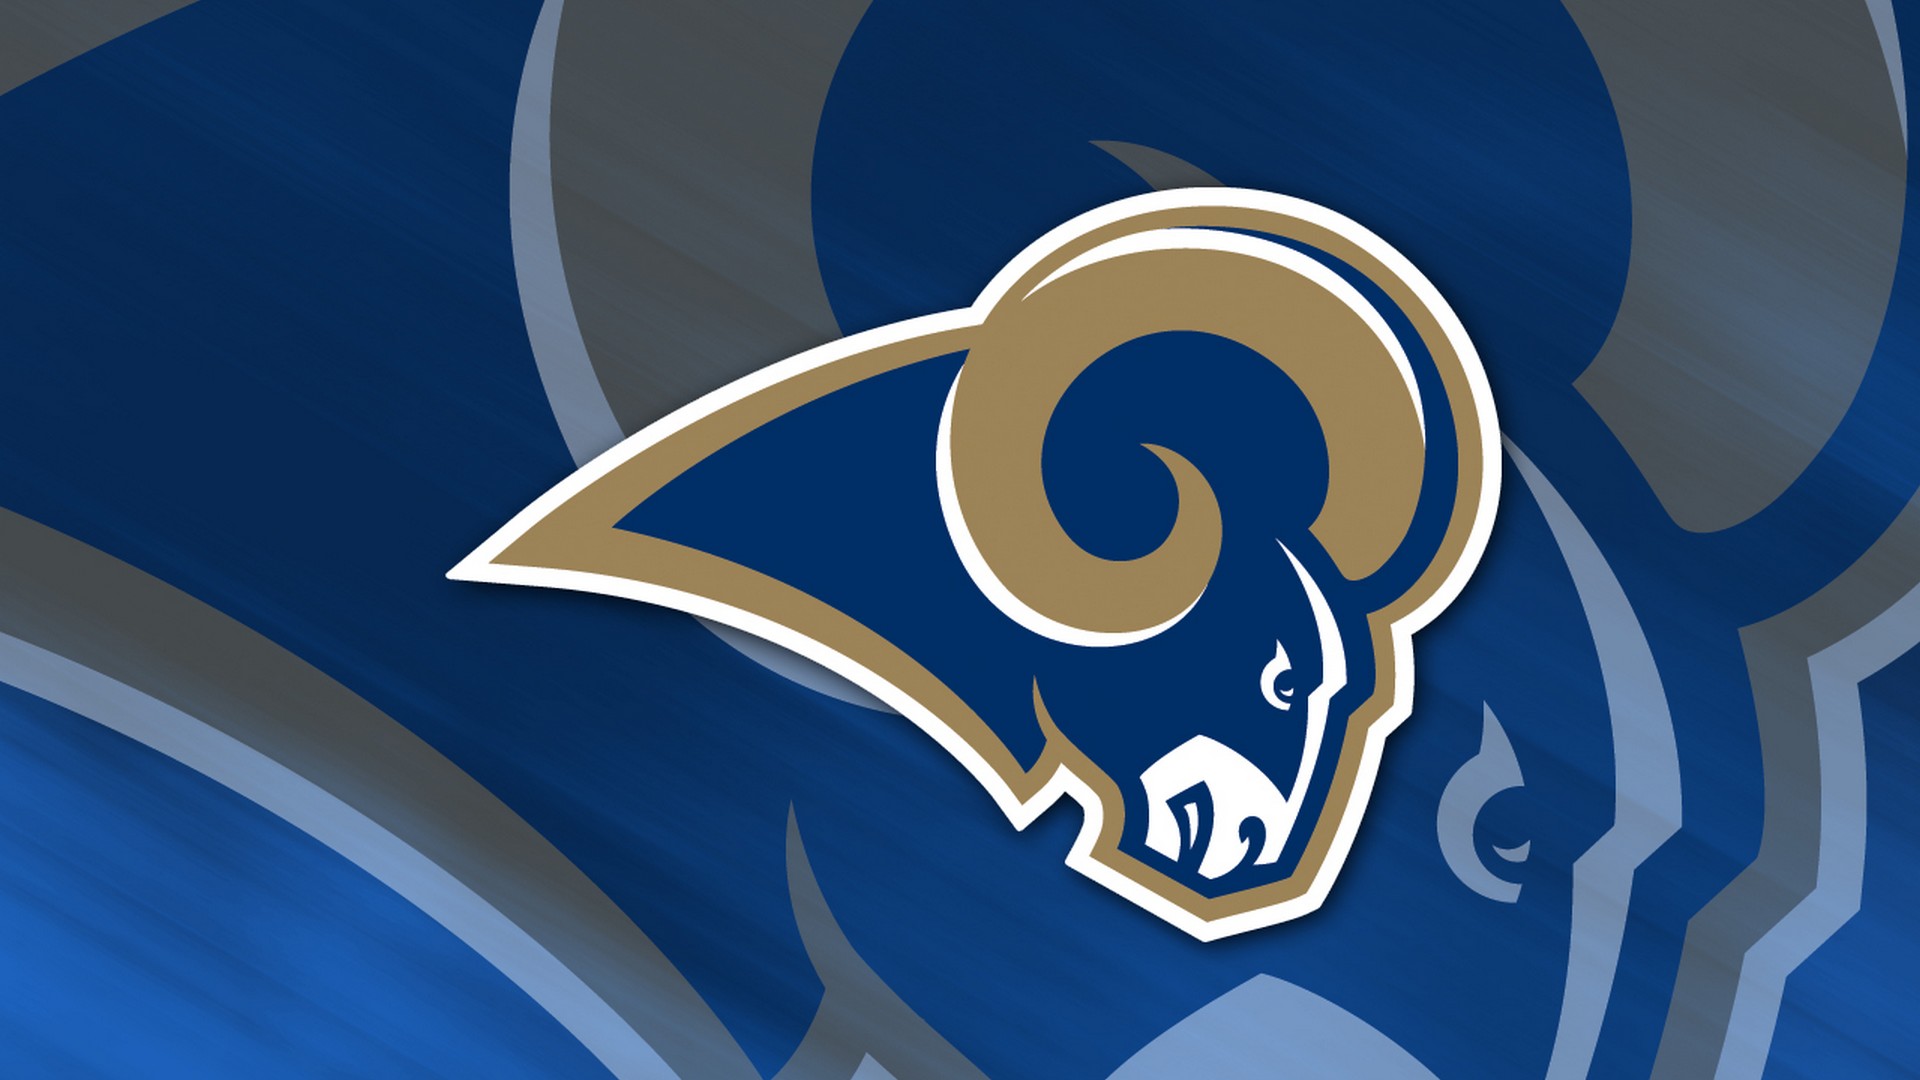 HD Los Angeles Rams Backgrounds with resolution 1920x1080 pixel. You can make this wallpaper for your Mac or Windows Desktop Background, iPhone, Android or Tablet and another Smartphone device